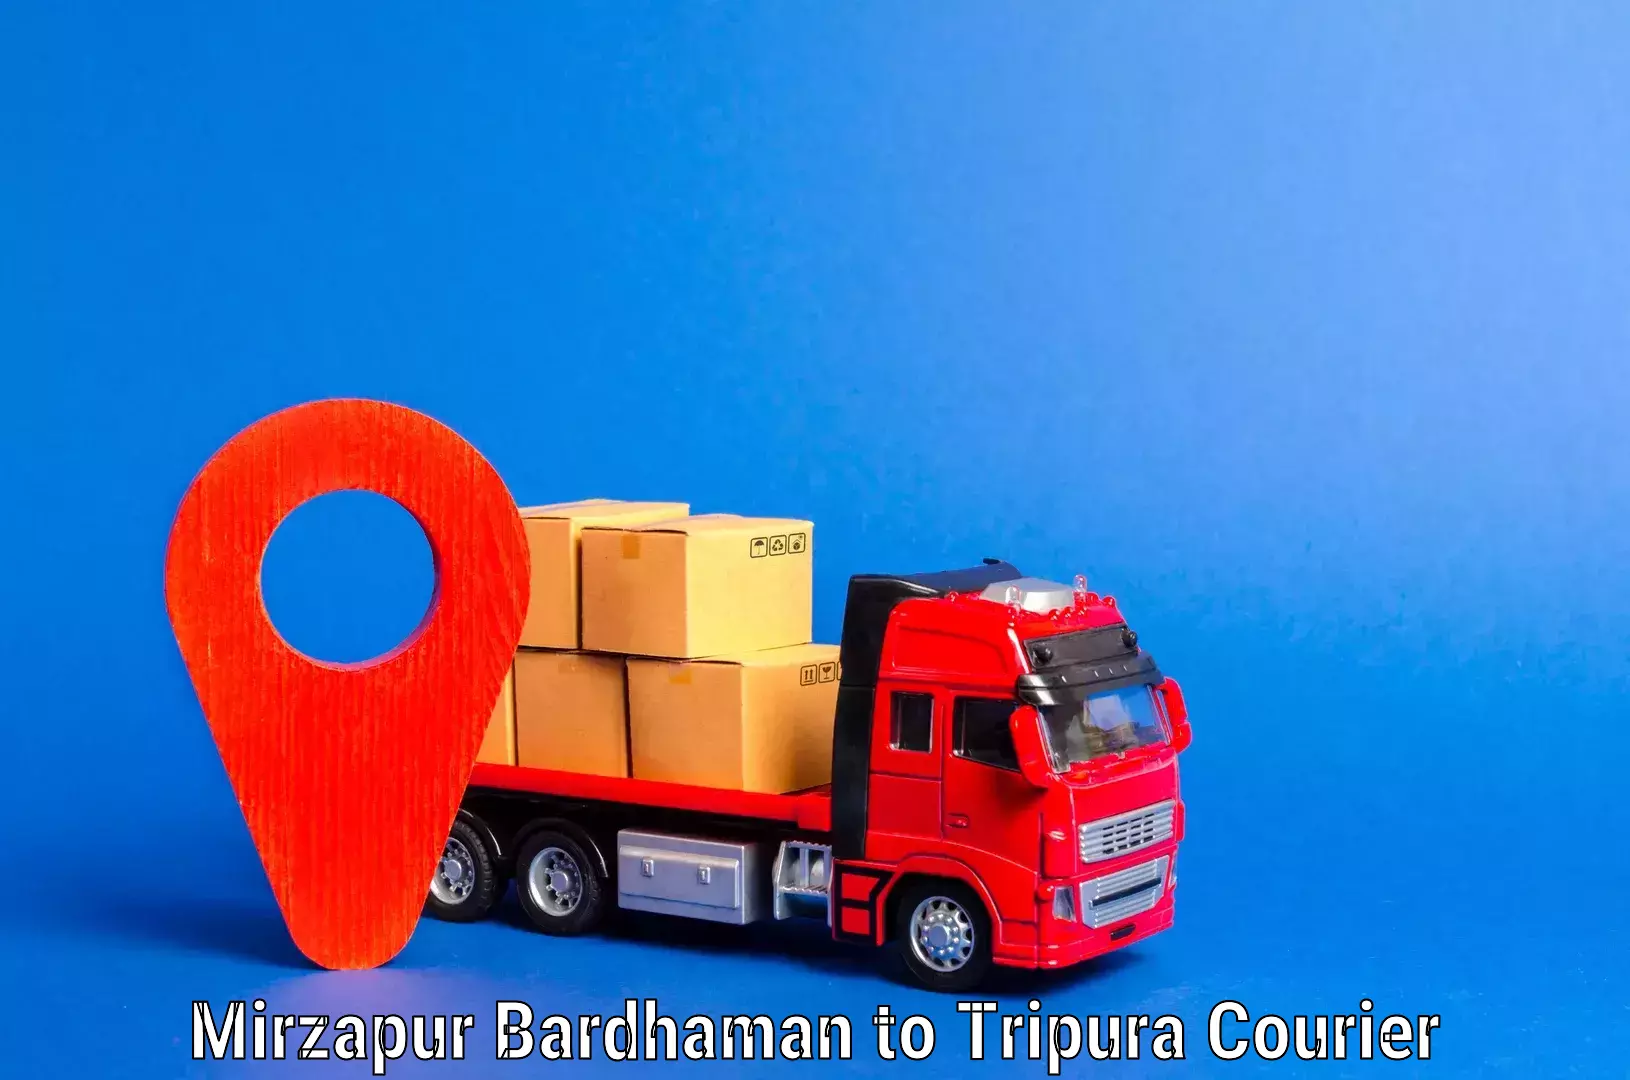 Quality relocation services Mirzapur Bardhaman to Tripura